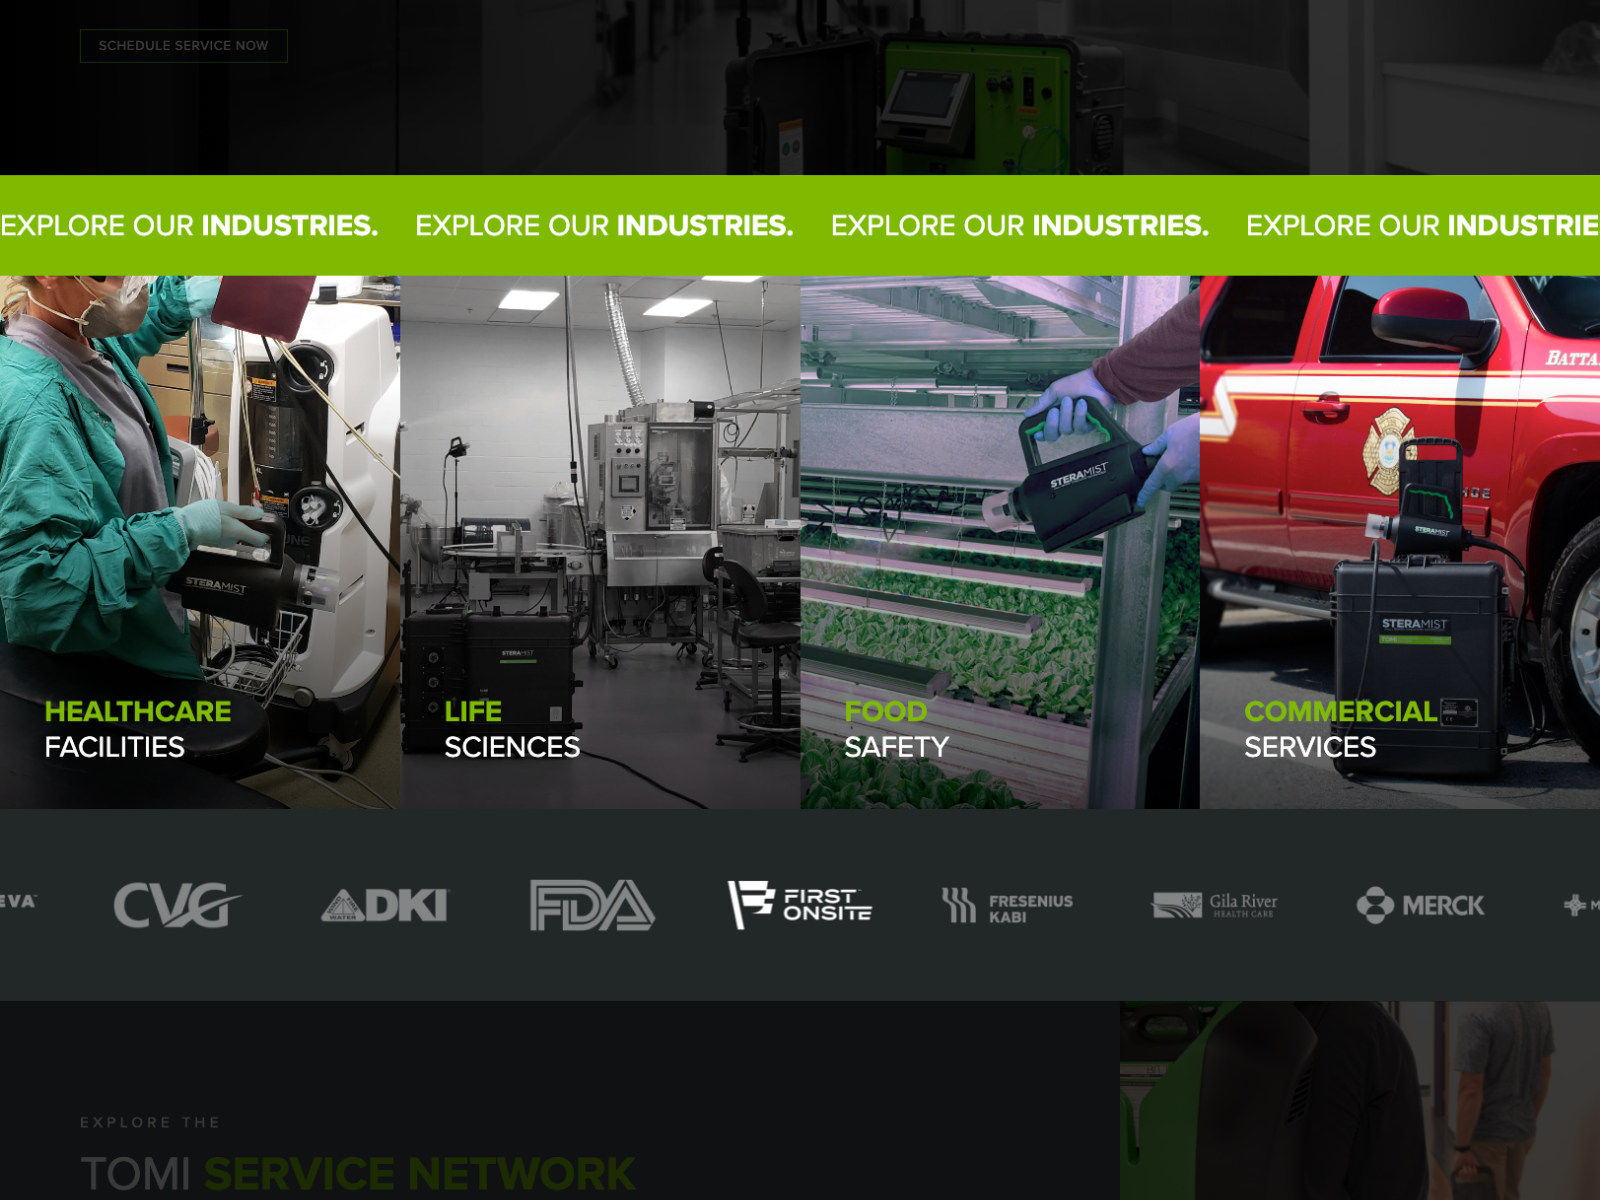 Explore Our Industries